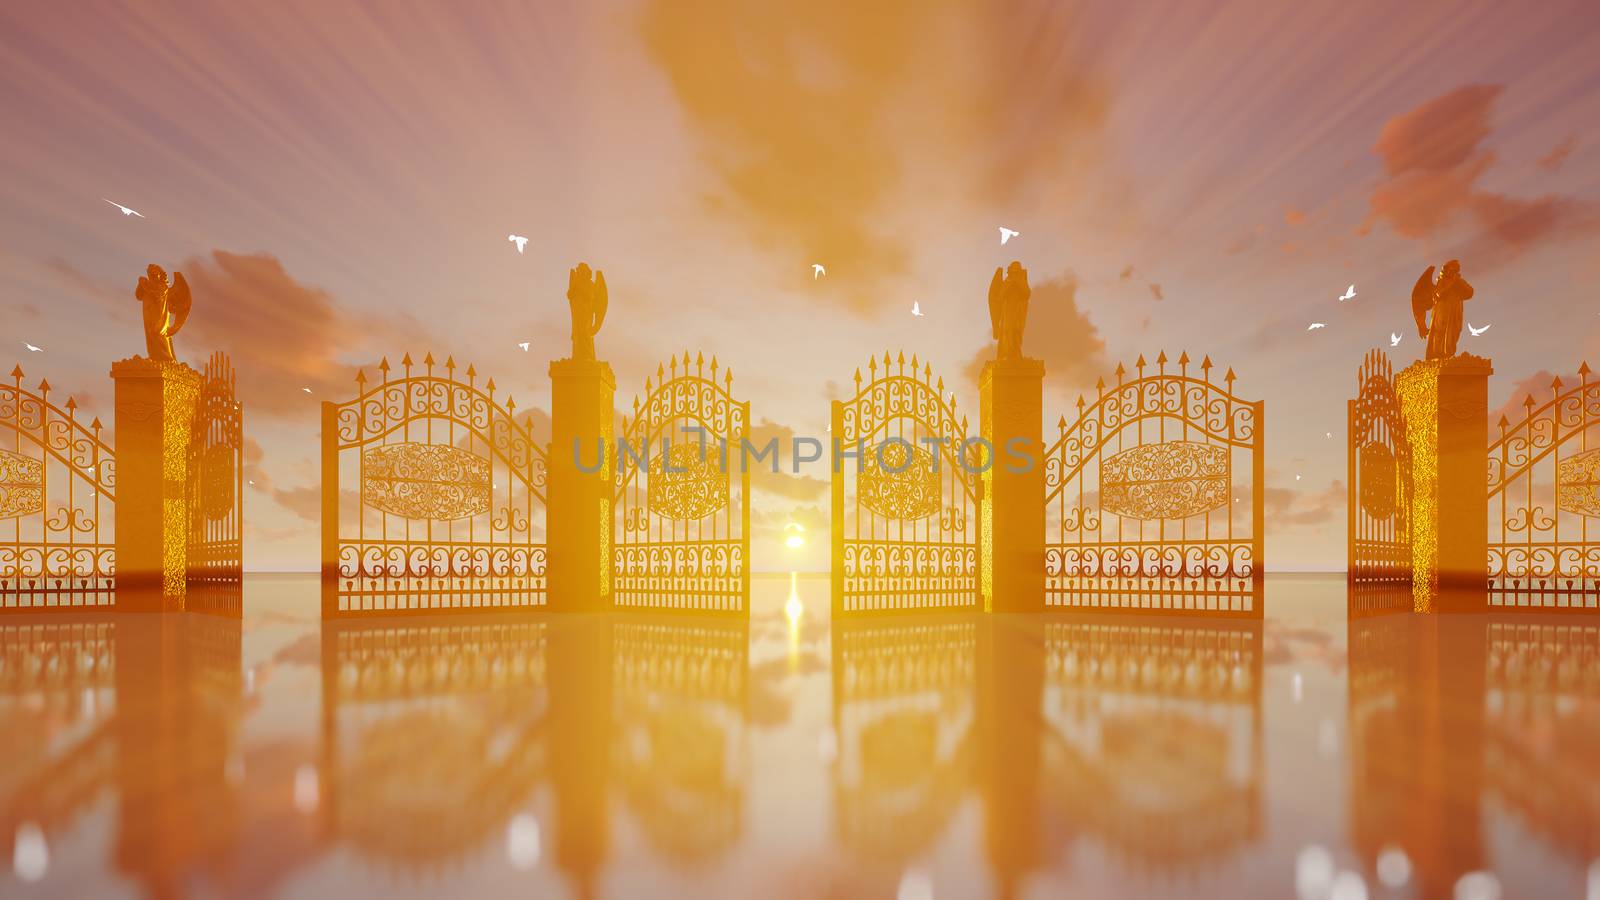 Golden gates of heaven opening against magical sunset and flying by pixelfootage